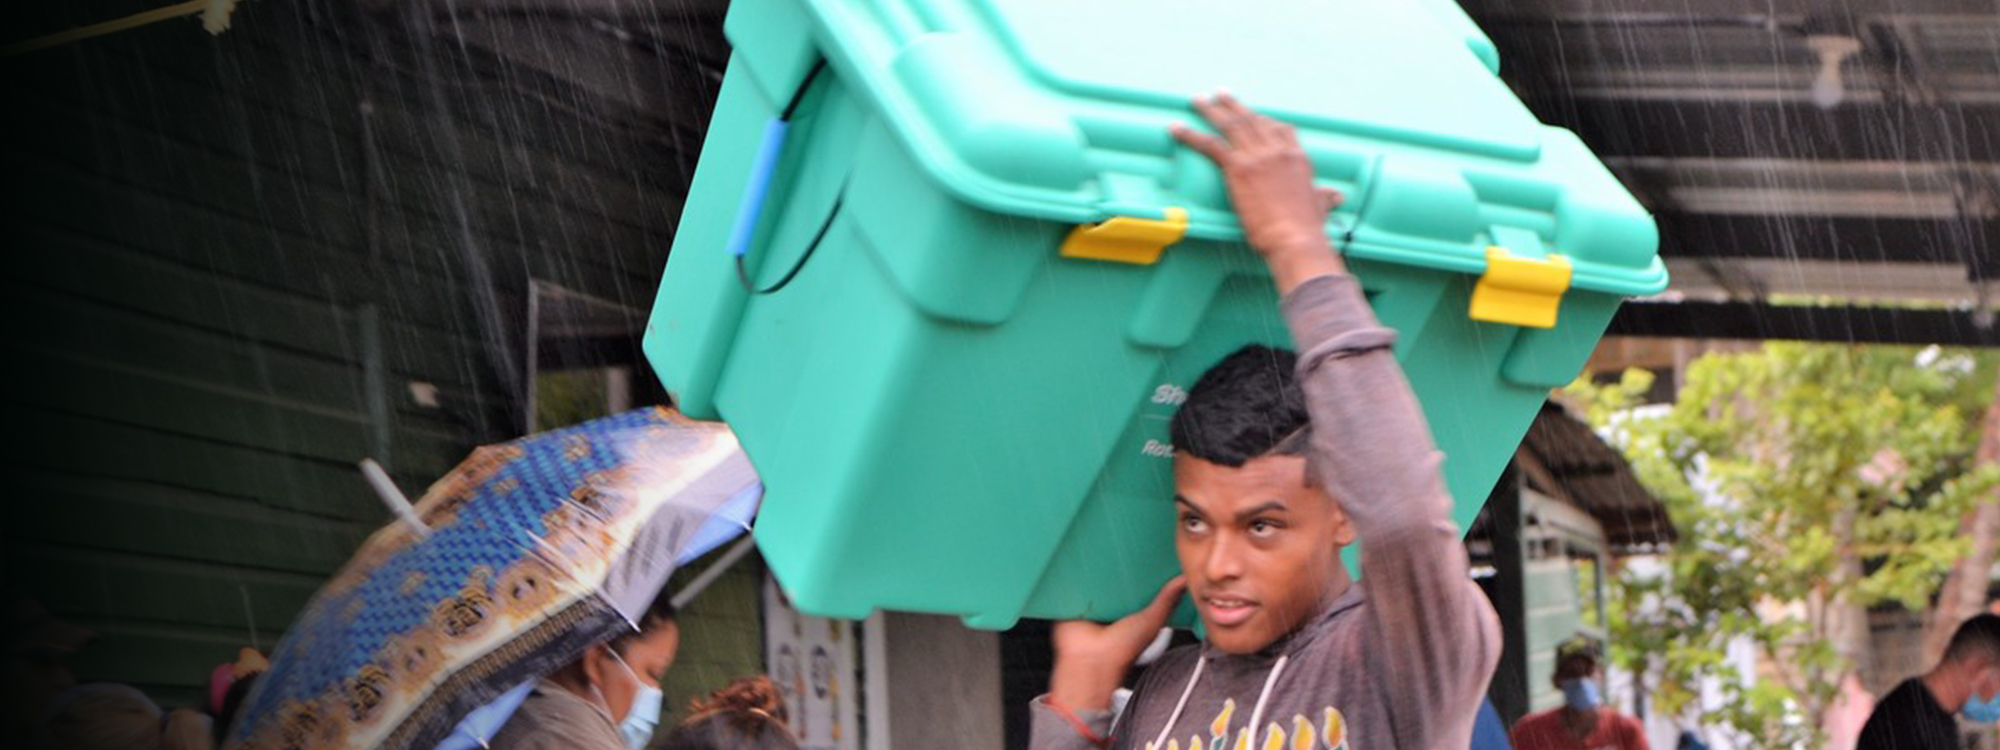 Man carrying a green shelterbox